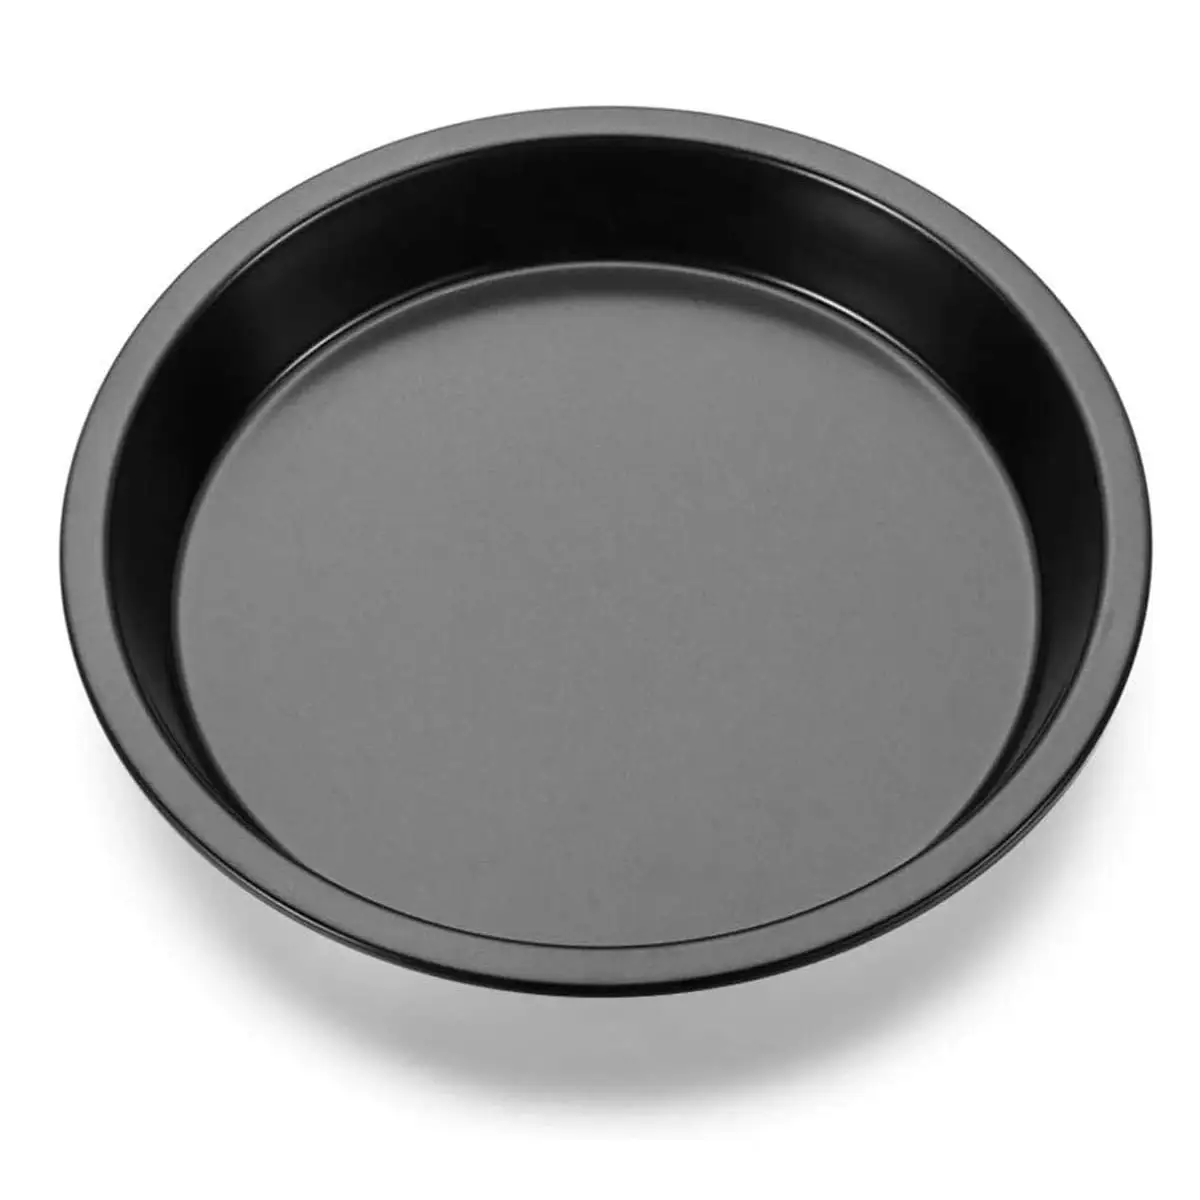 8 Inch Carbon Steel Pizza Tray Non-Stick Round Shape pizza pan Bakeware baking dishes & pans